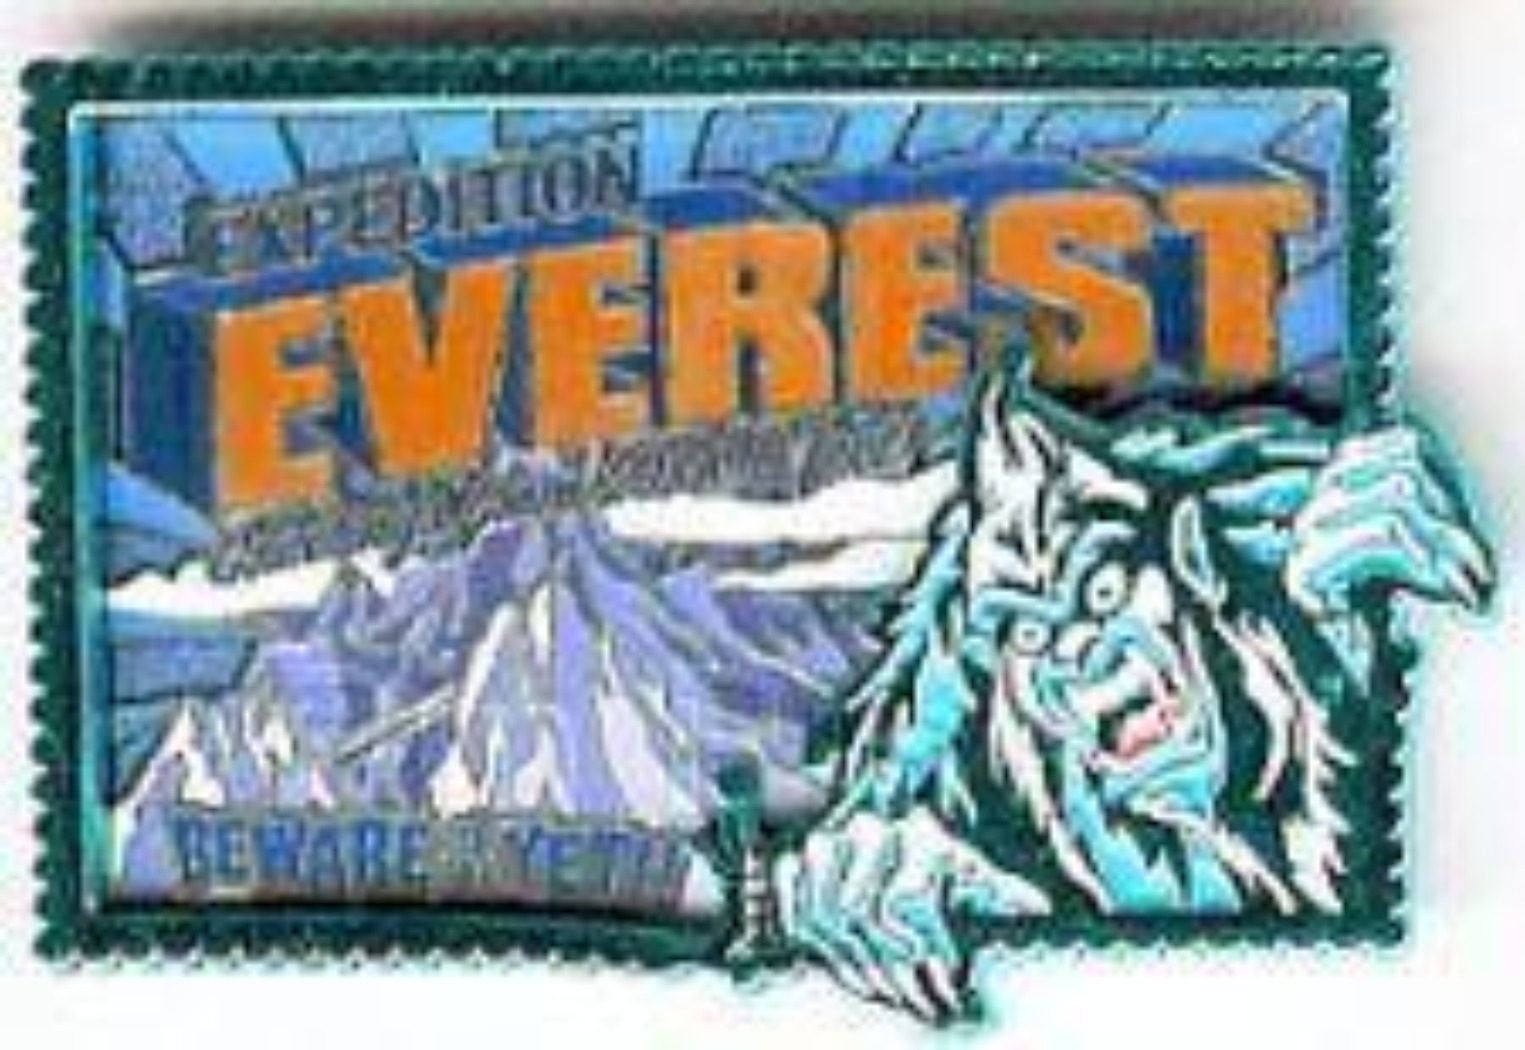 Disney Pin 44344 WDW Expedition Everest Beware of the Yeti Postcard Blue Metal